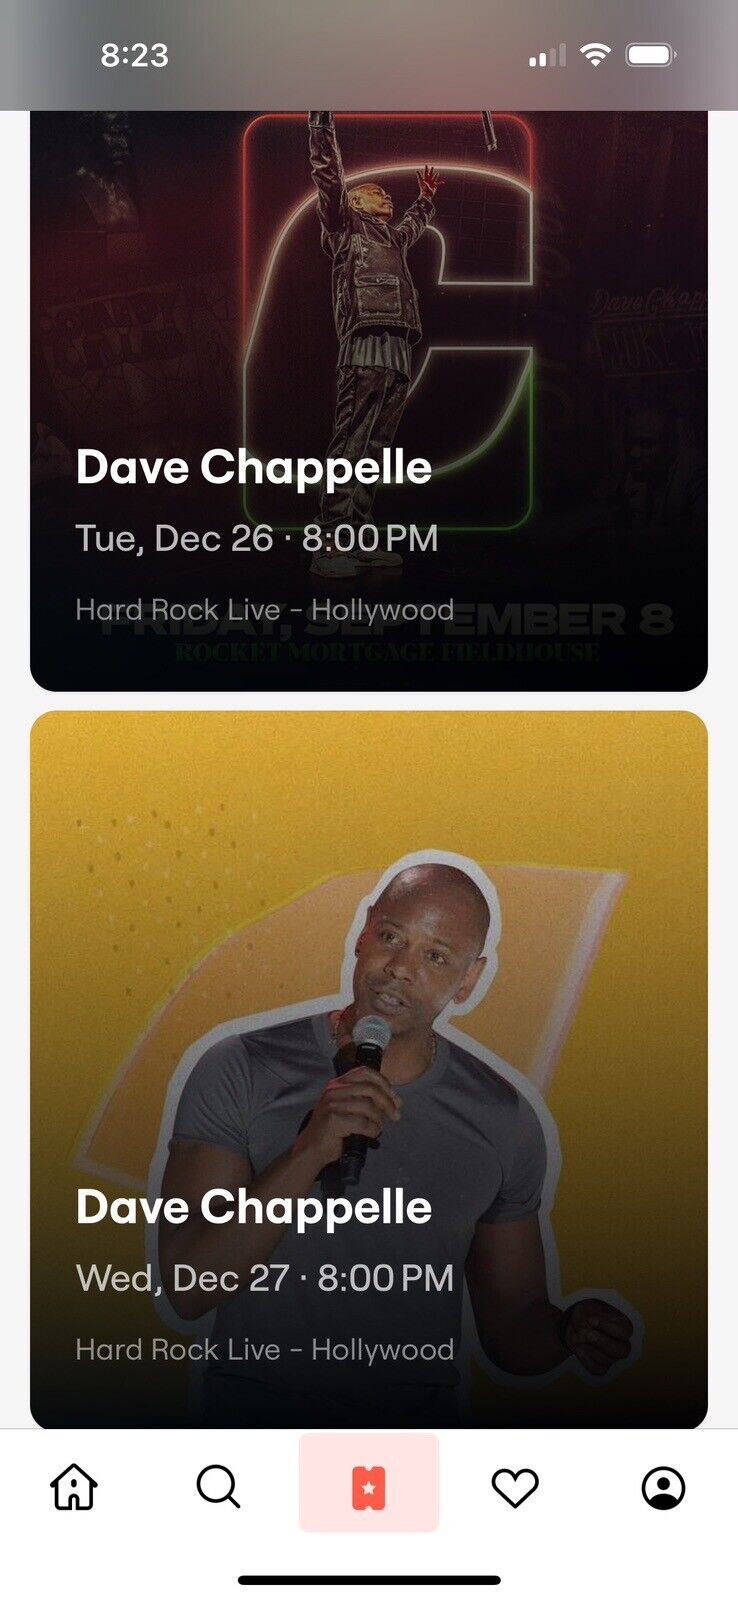 Dave Chappelle Tickets - Dec 26th - Hard Rock Live - Hollywood FL